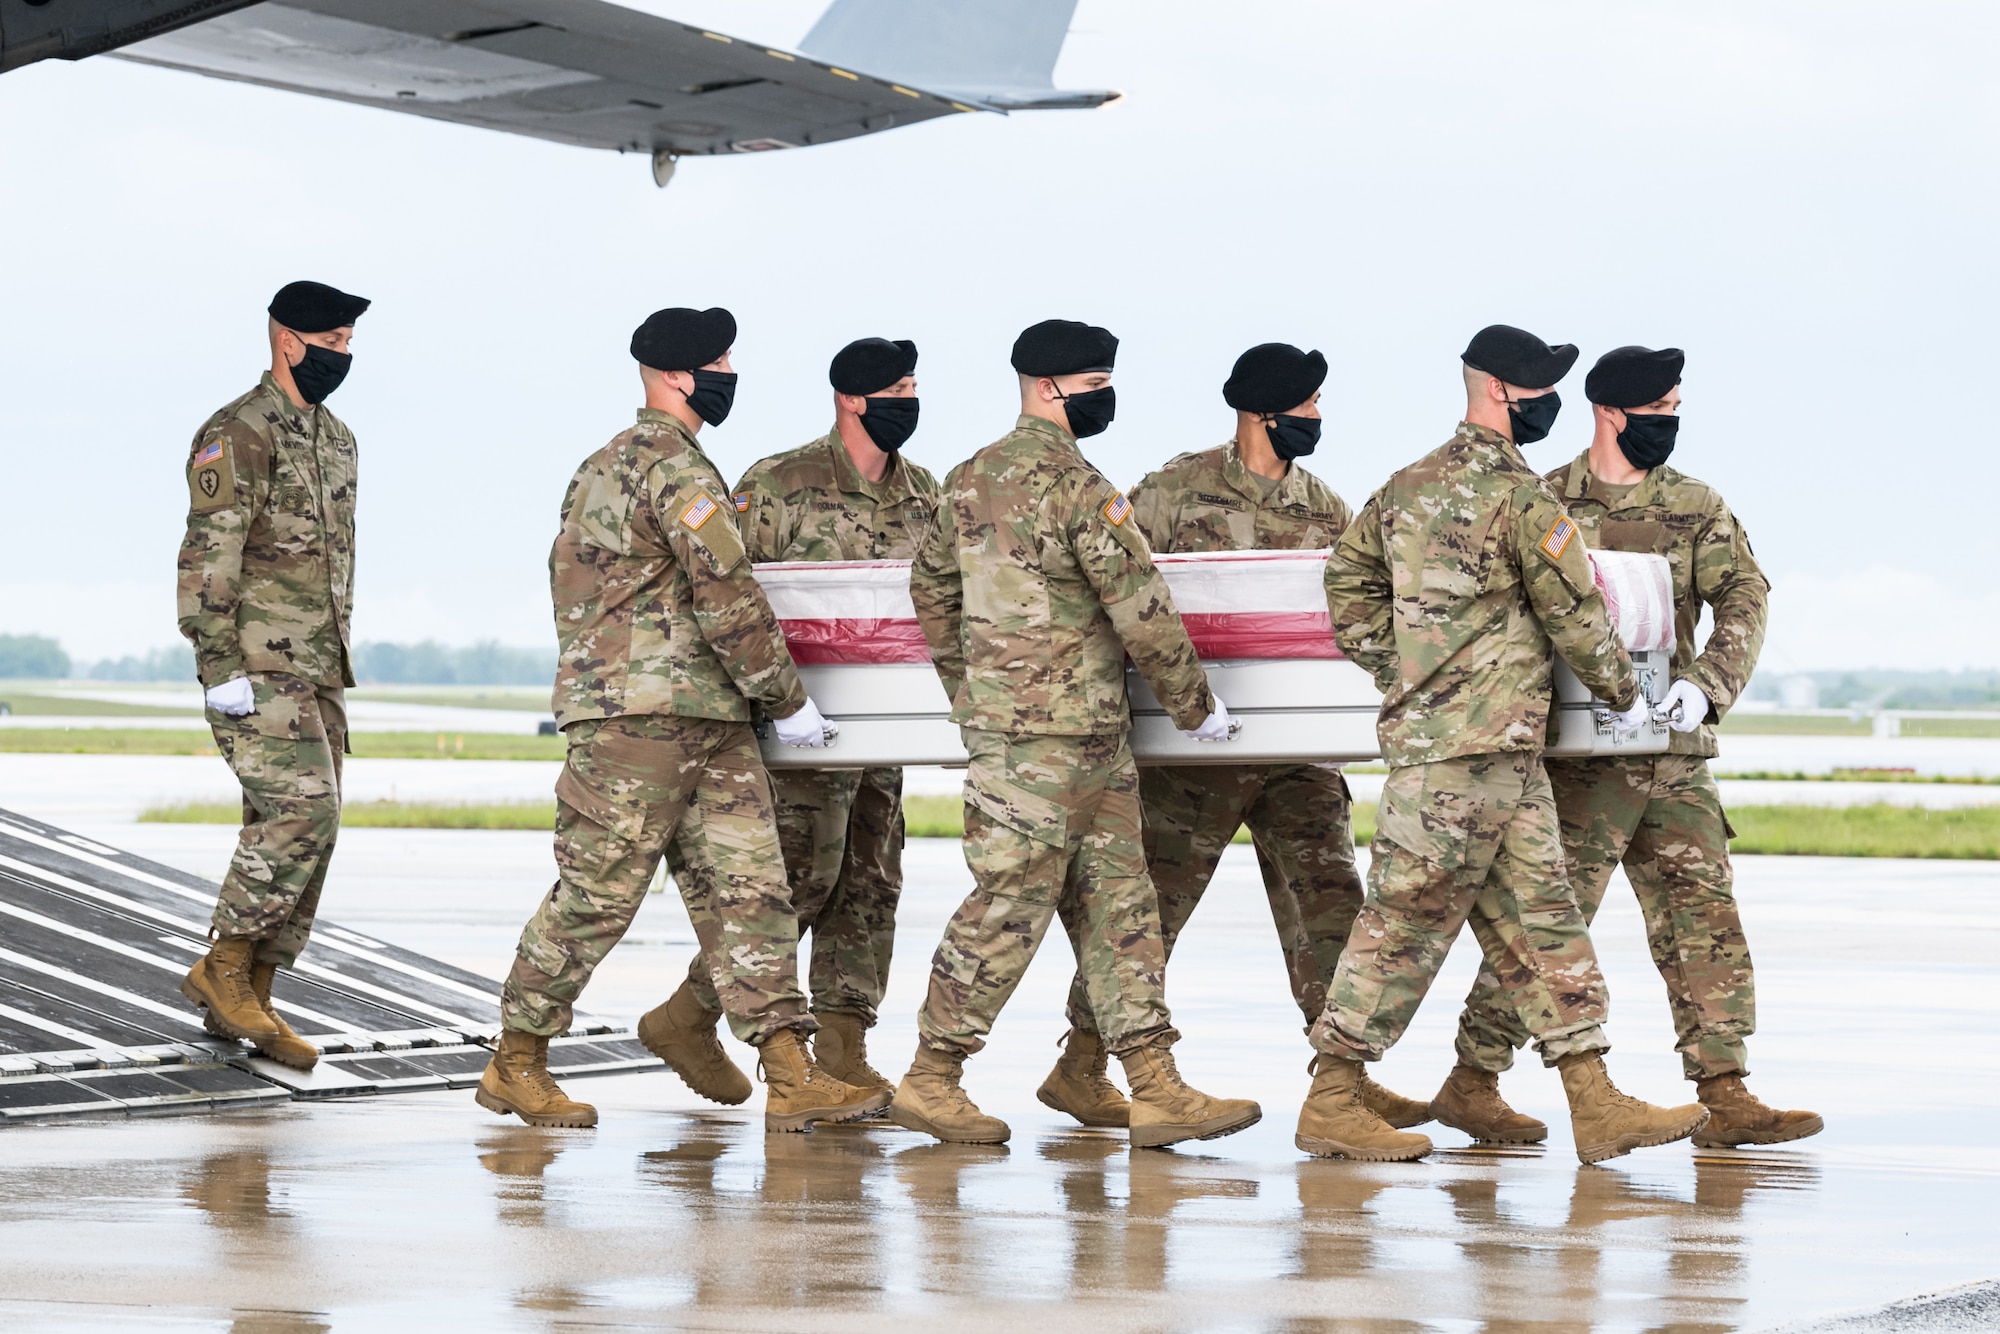 A U.S. Army carry team transfers the remains of 1st Lt. Trevarius R. Bowman, of Spartanburg, South Carolina, during a dignified transfer May 23, 2020, at Dover Air Force Base, Delaware. Bowman was assigned to Company B, 198th Signal Battalion, 261st Signal Brigade, Newberry, South Carolina. The unit is attached to the 228th Theater Tactical Signal Brigade, South Carolina National Guard. (U.S. Air Force photo by Roland Balik)